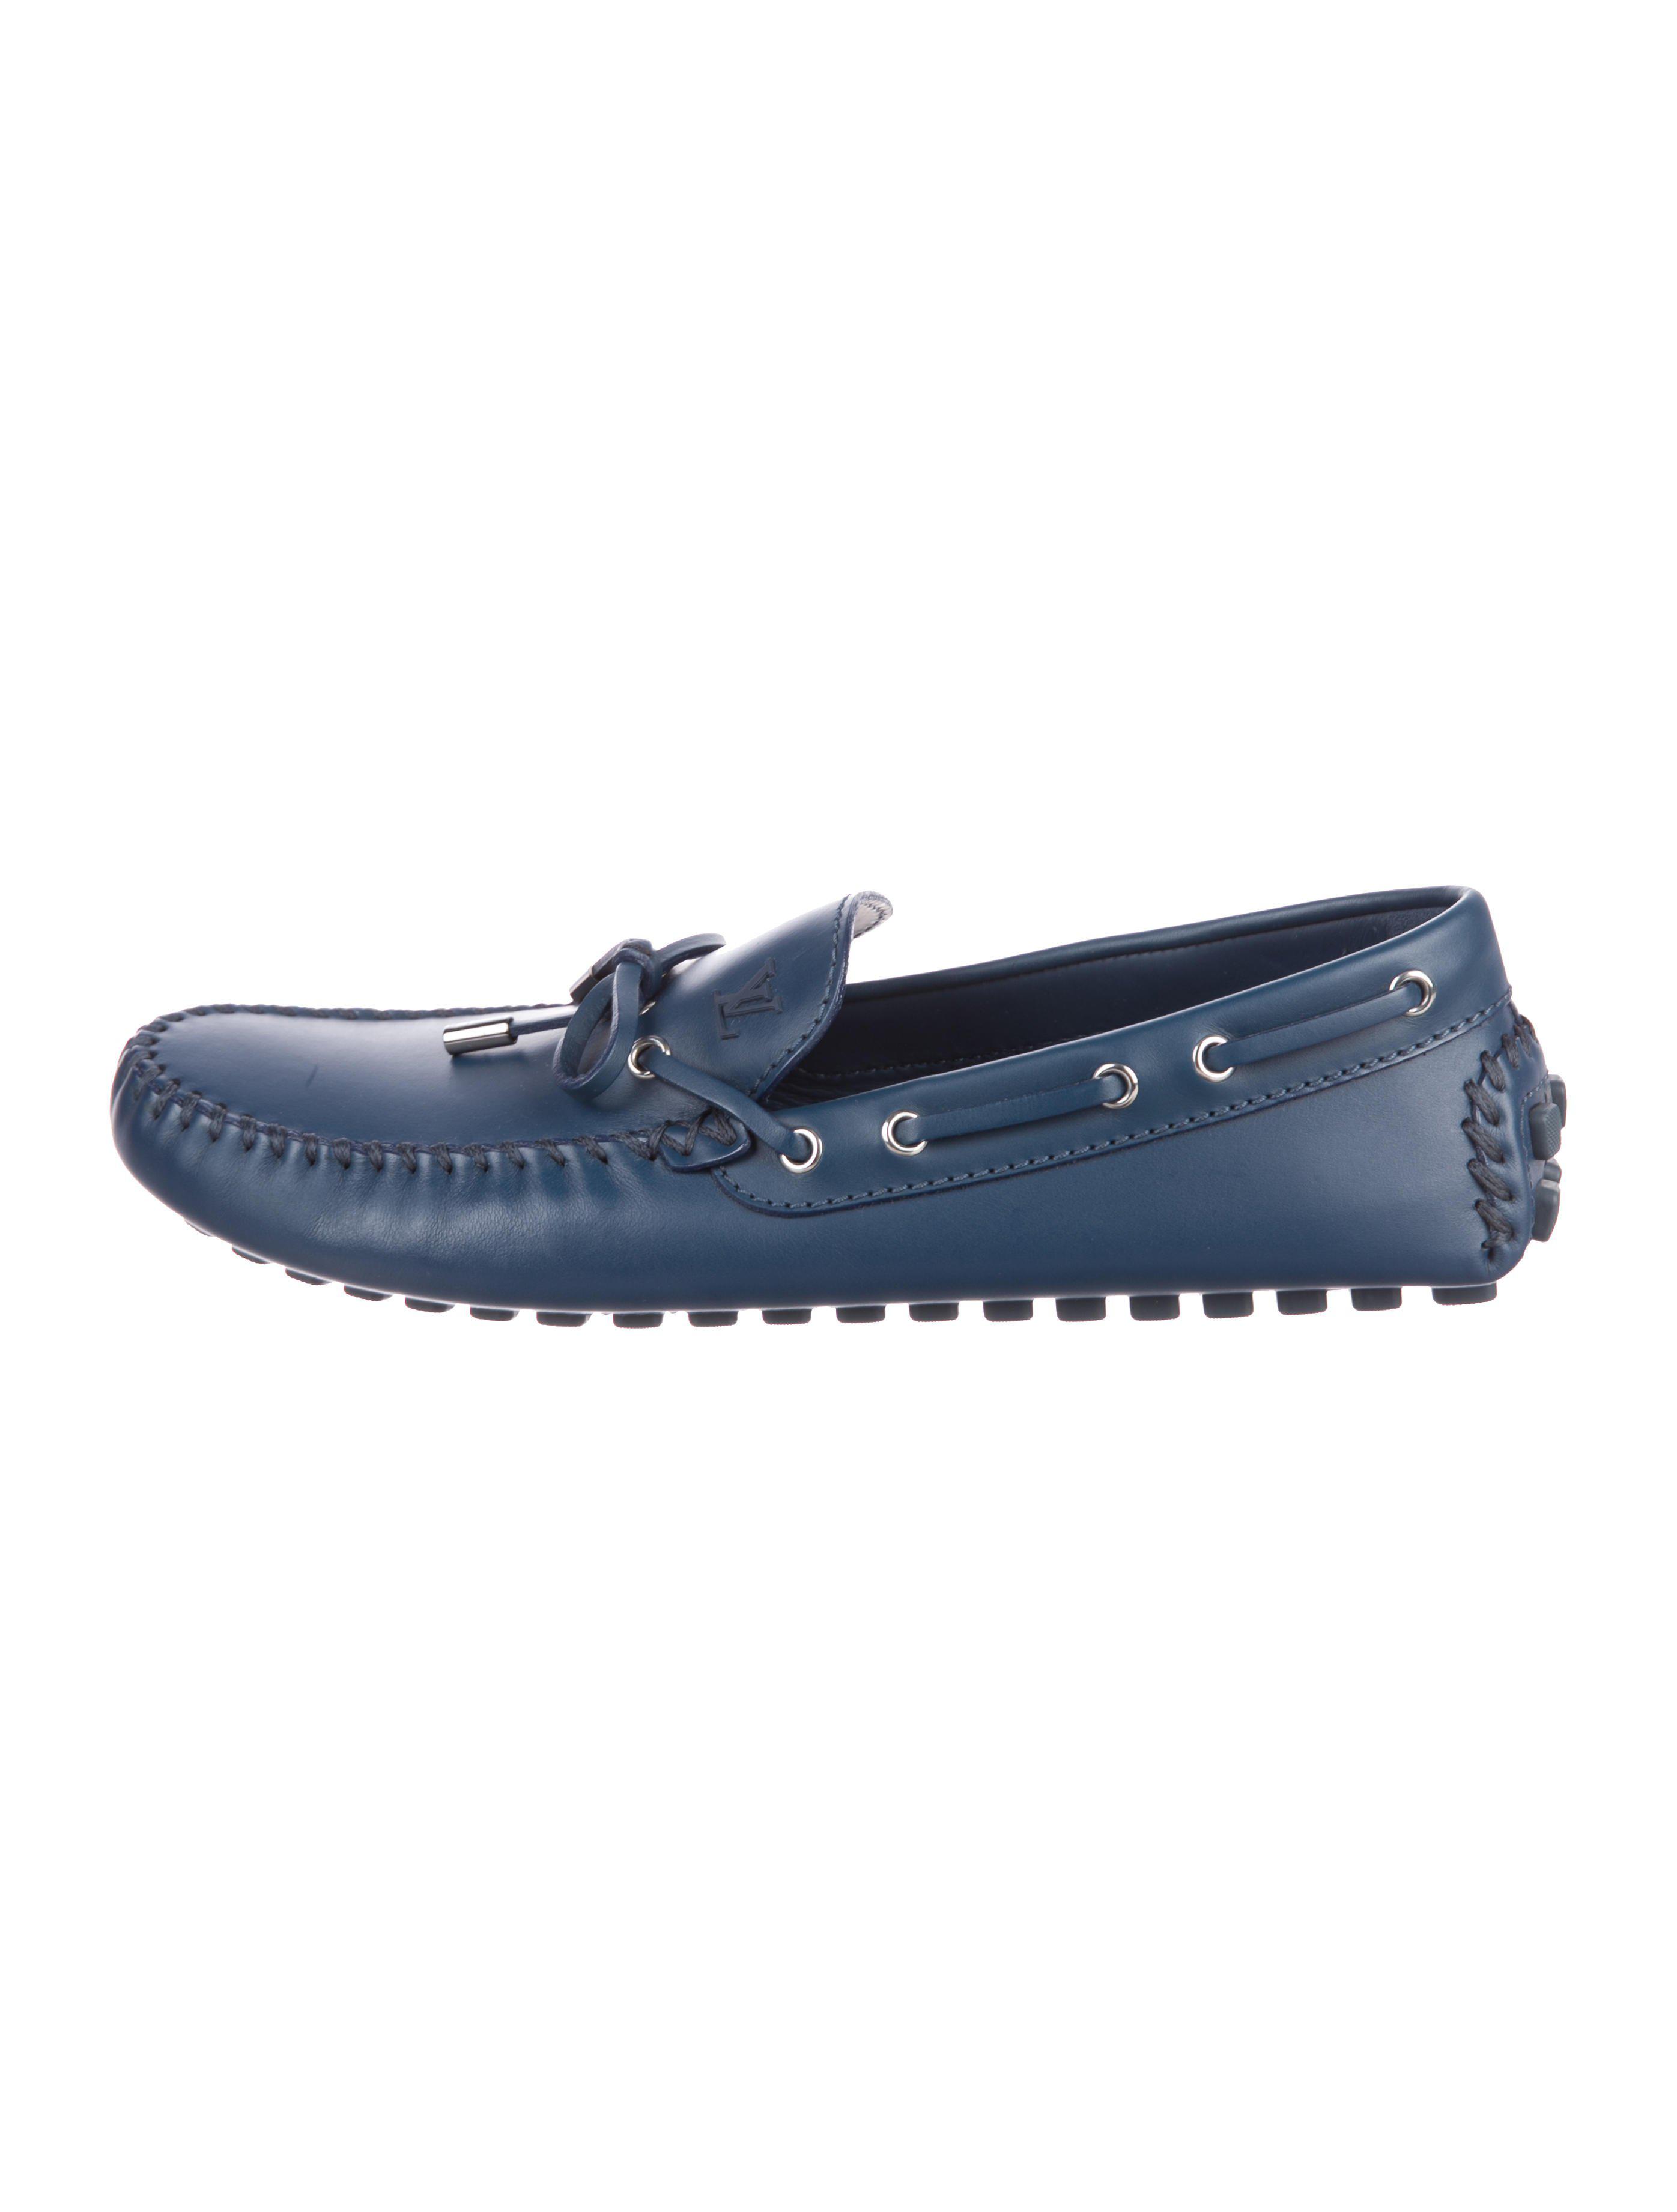 Lyst - Louis Vuitton Arizona Driving Loafers W/ Tags in Blue for Men